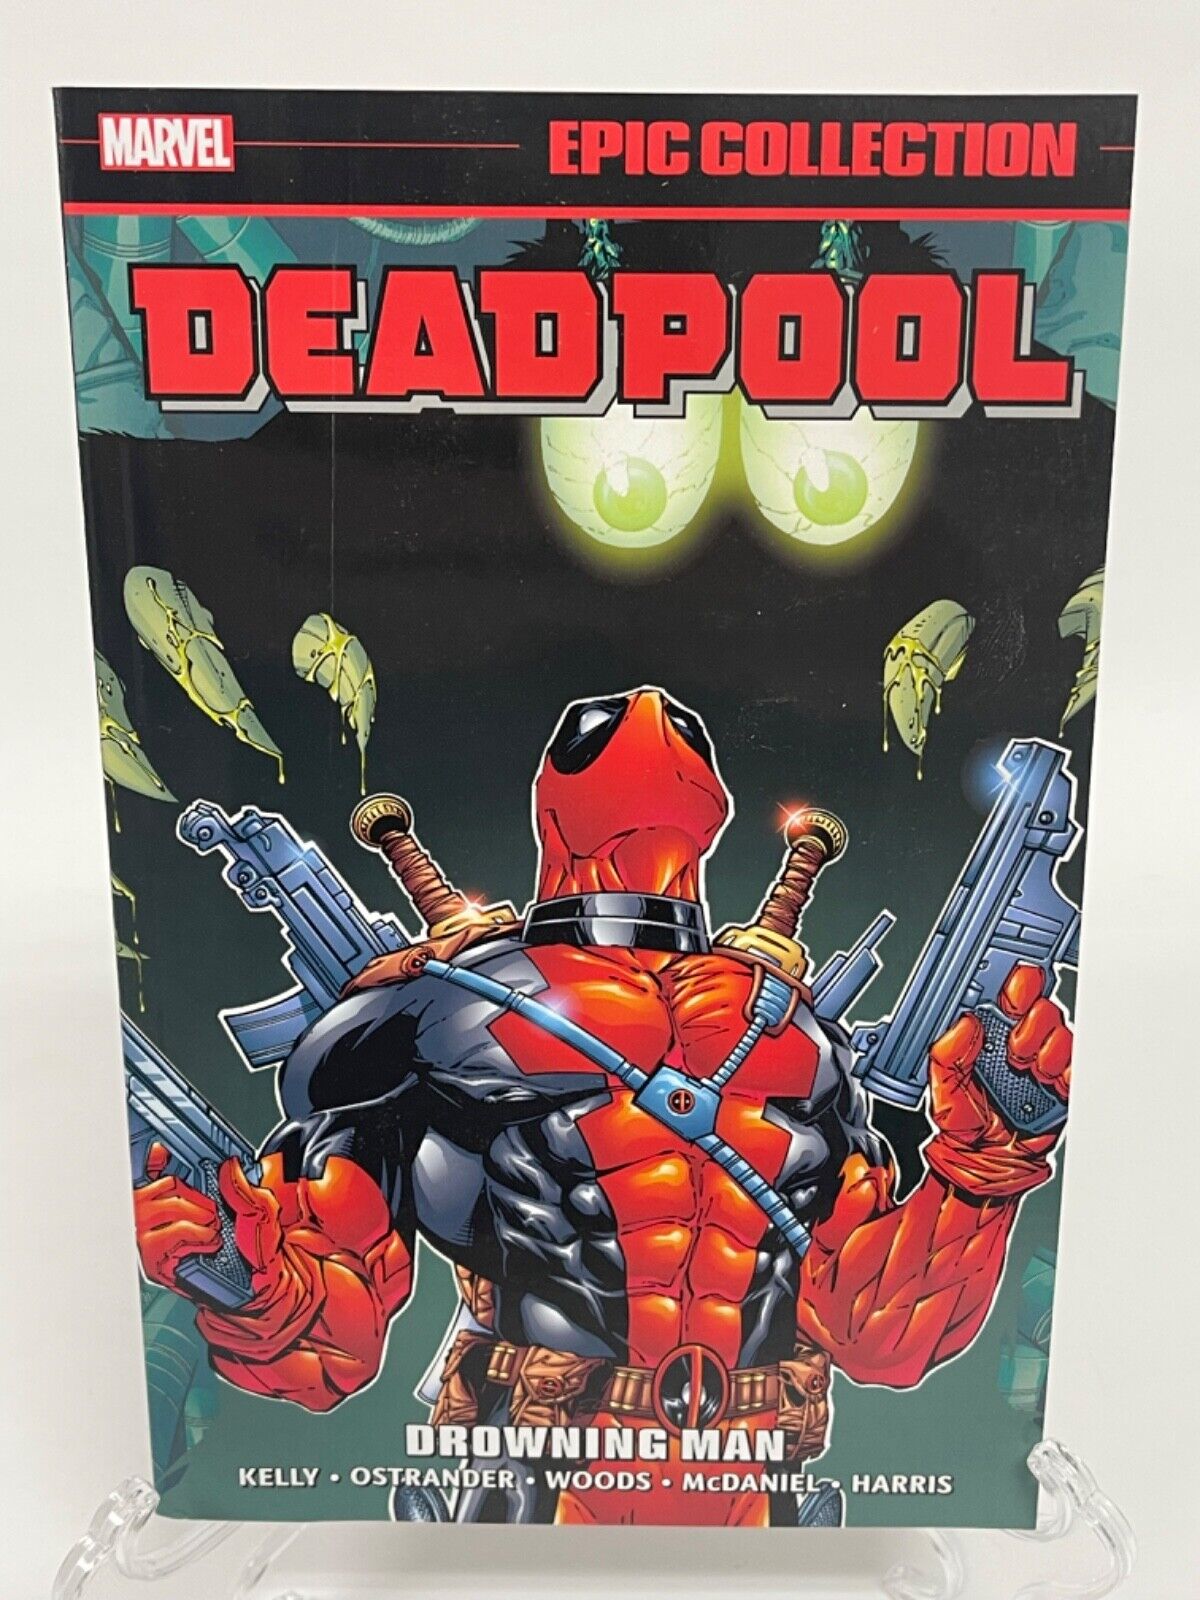 Deadpool Epic Collection Vol 3 Drowning Man New Marvel Comics TPB Paperback